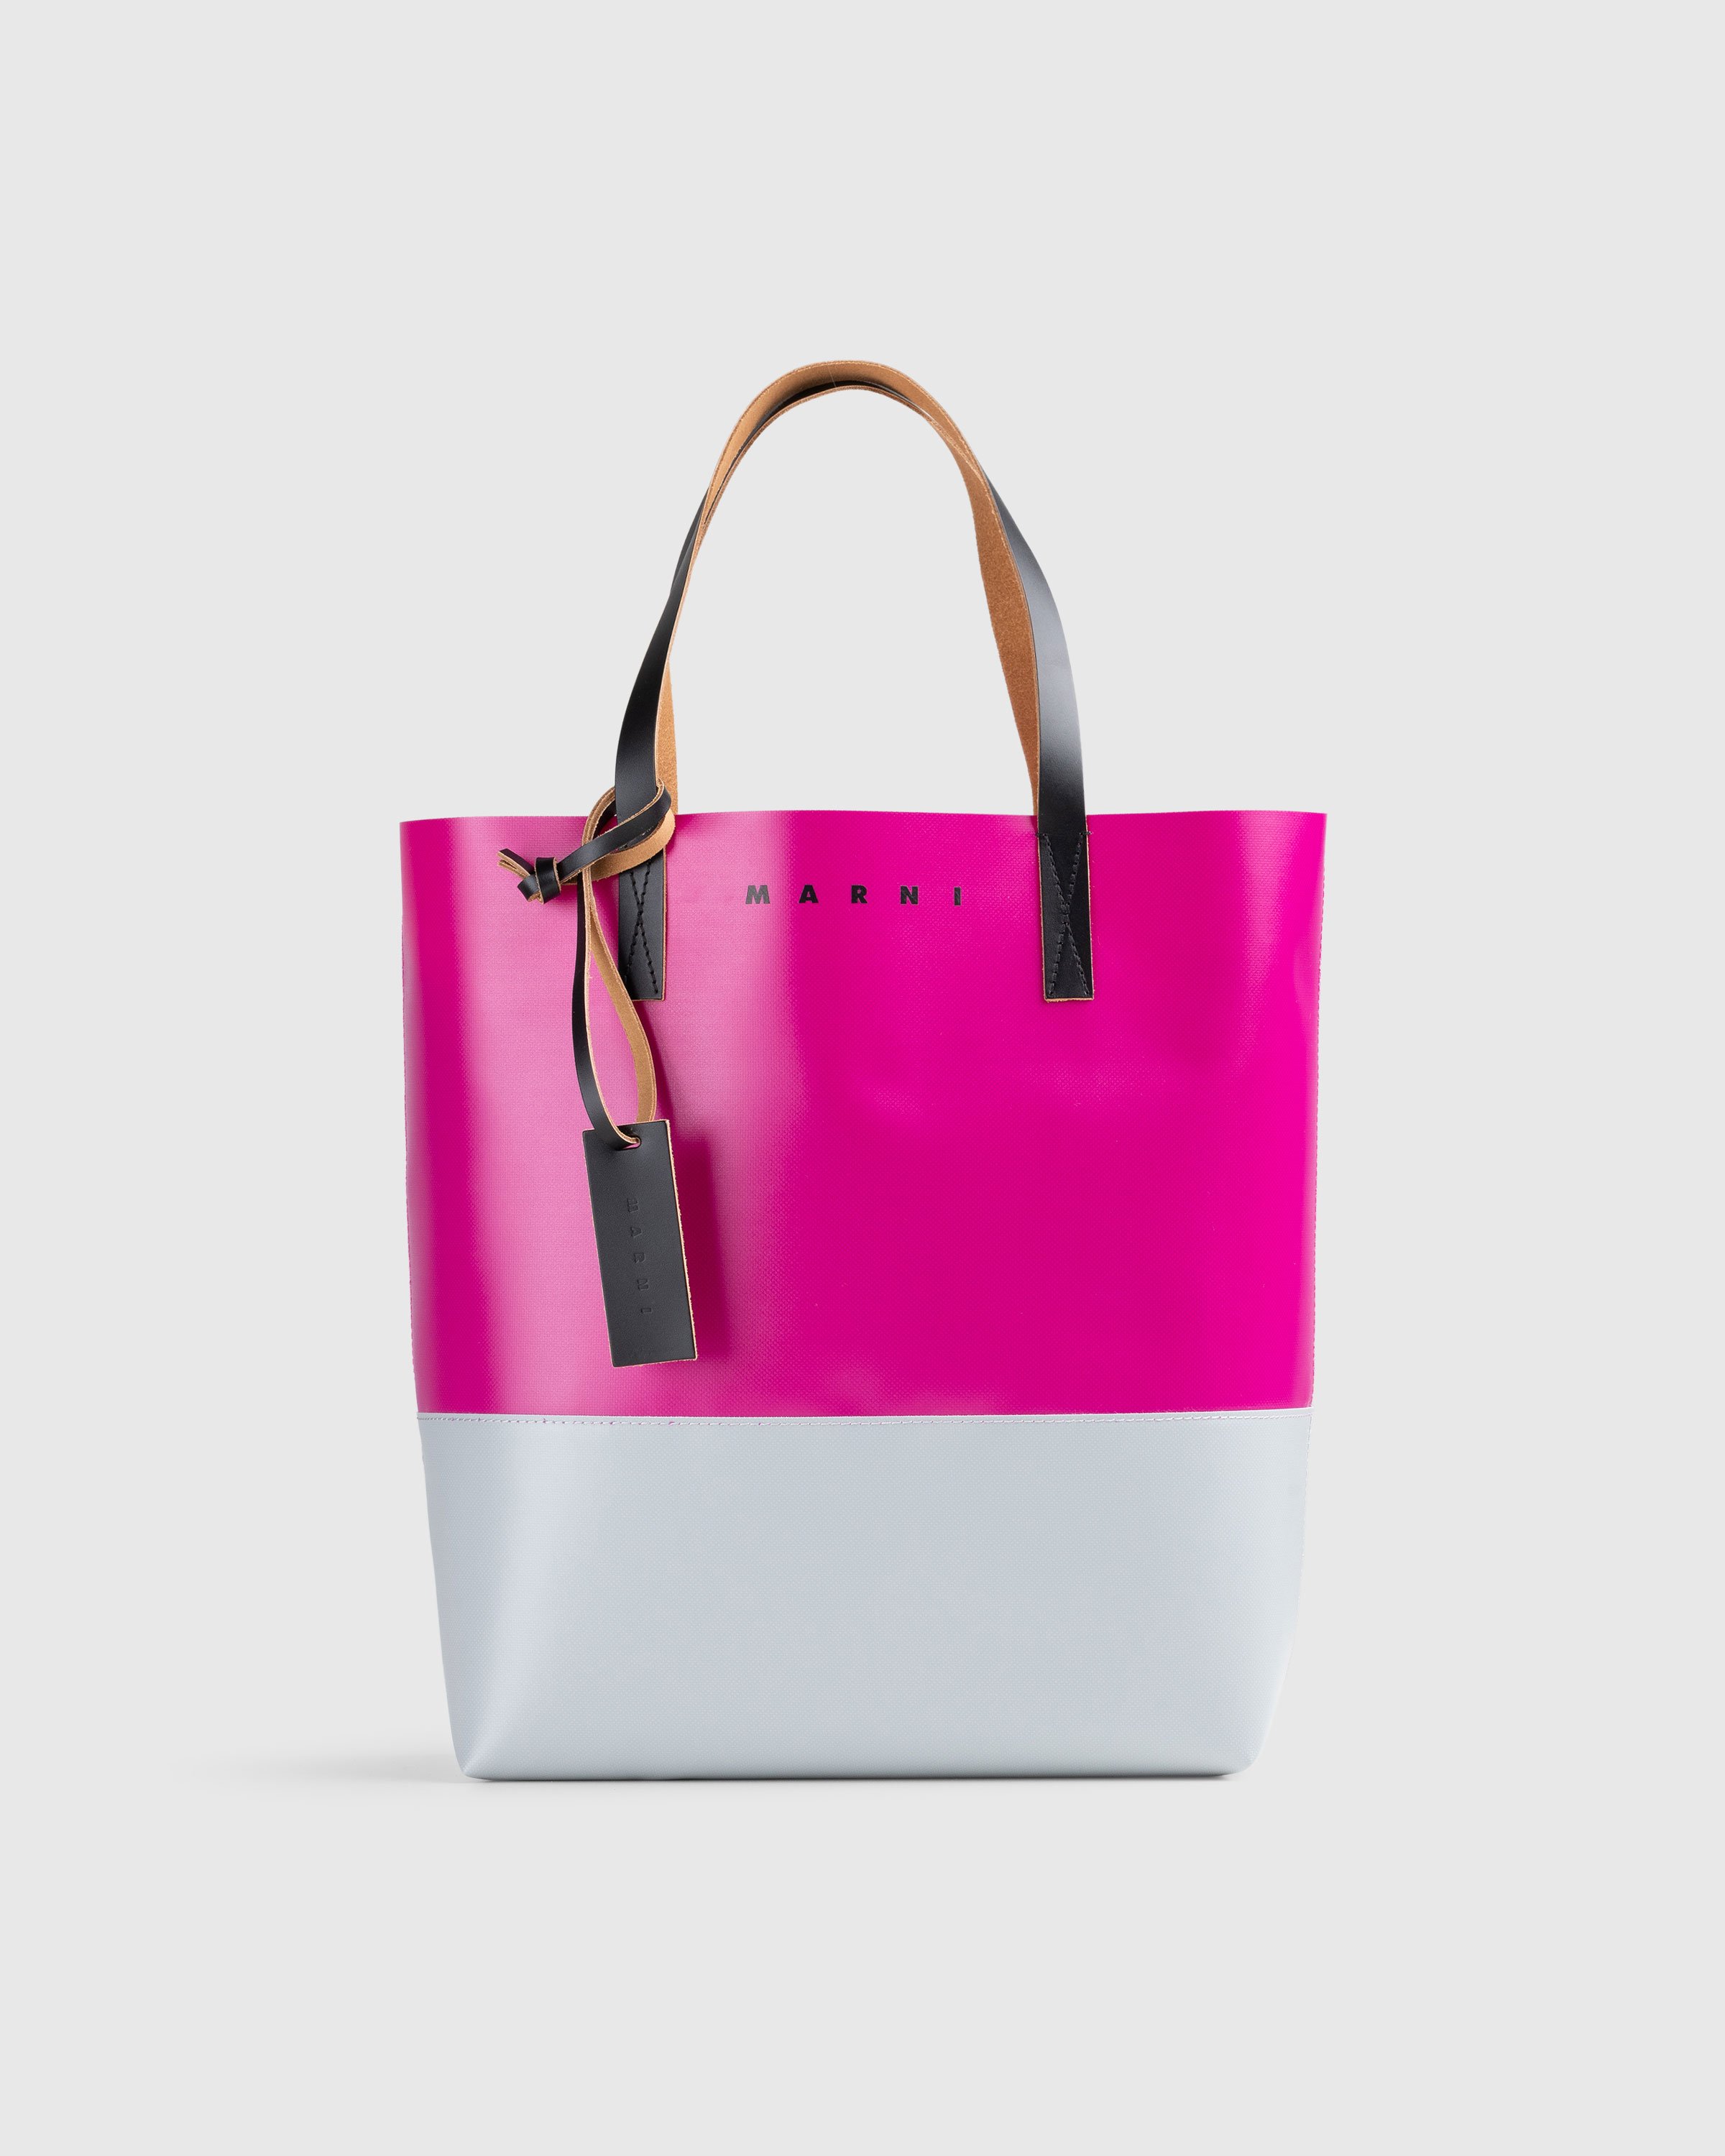 Marni - Tribeca Two-Tone Shopping Bag Pink/Grey - Accessories - Pink - Image 1